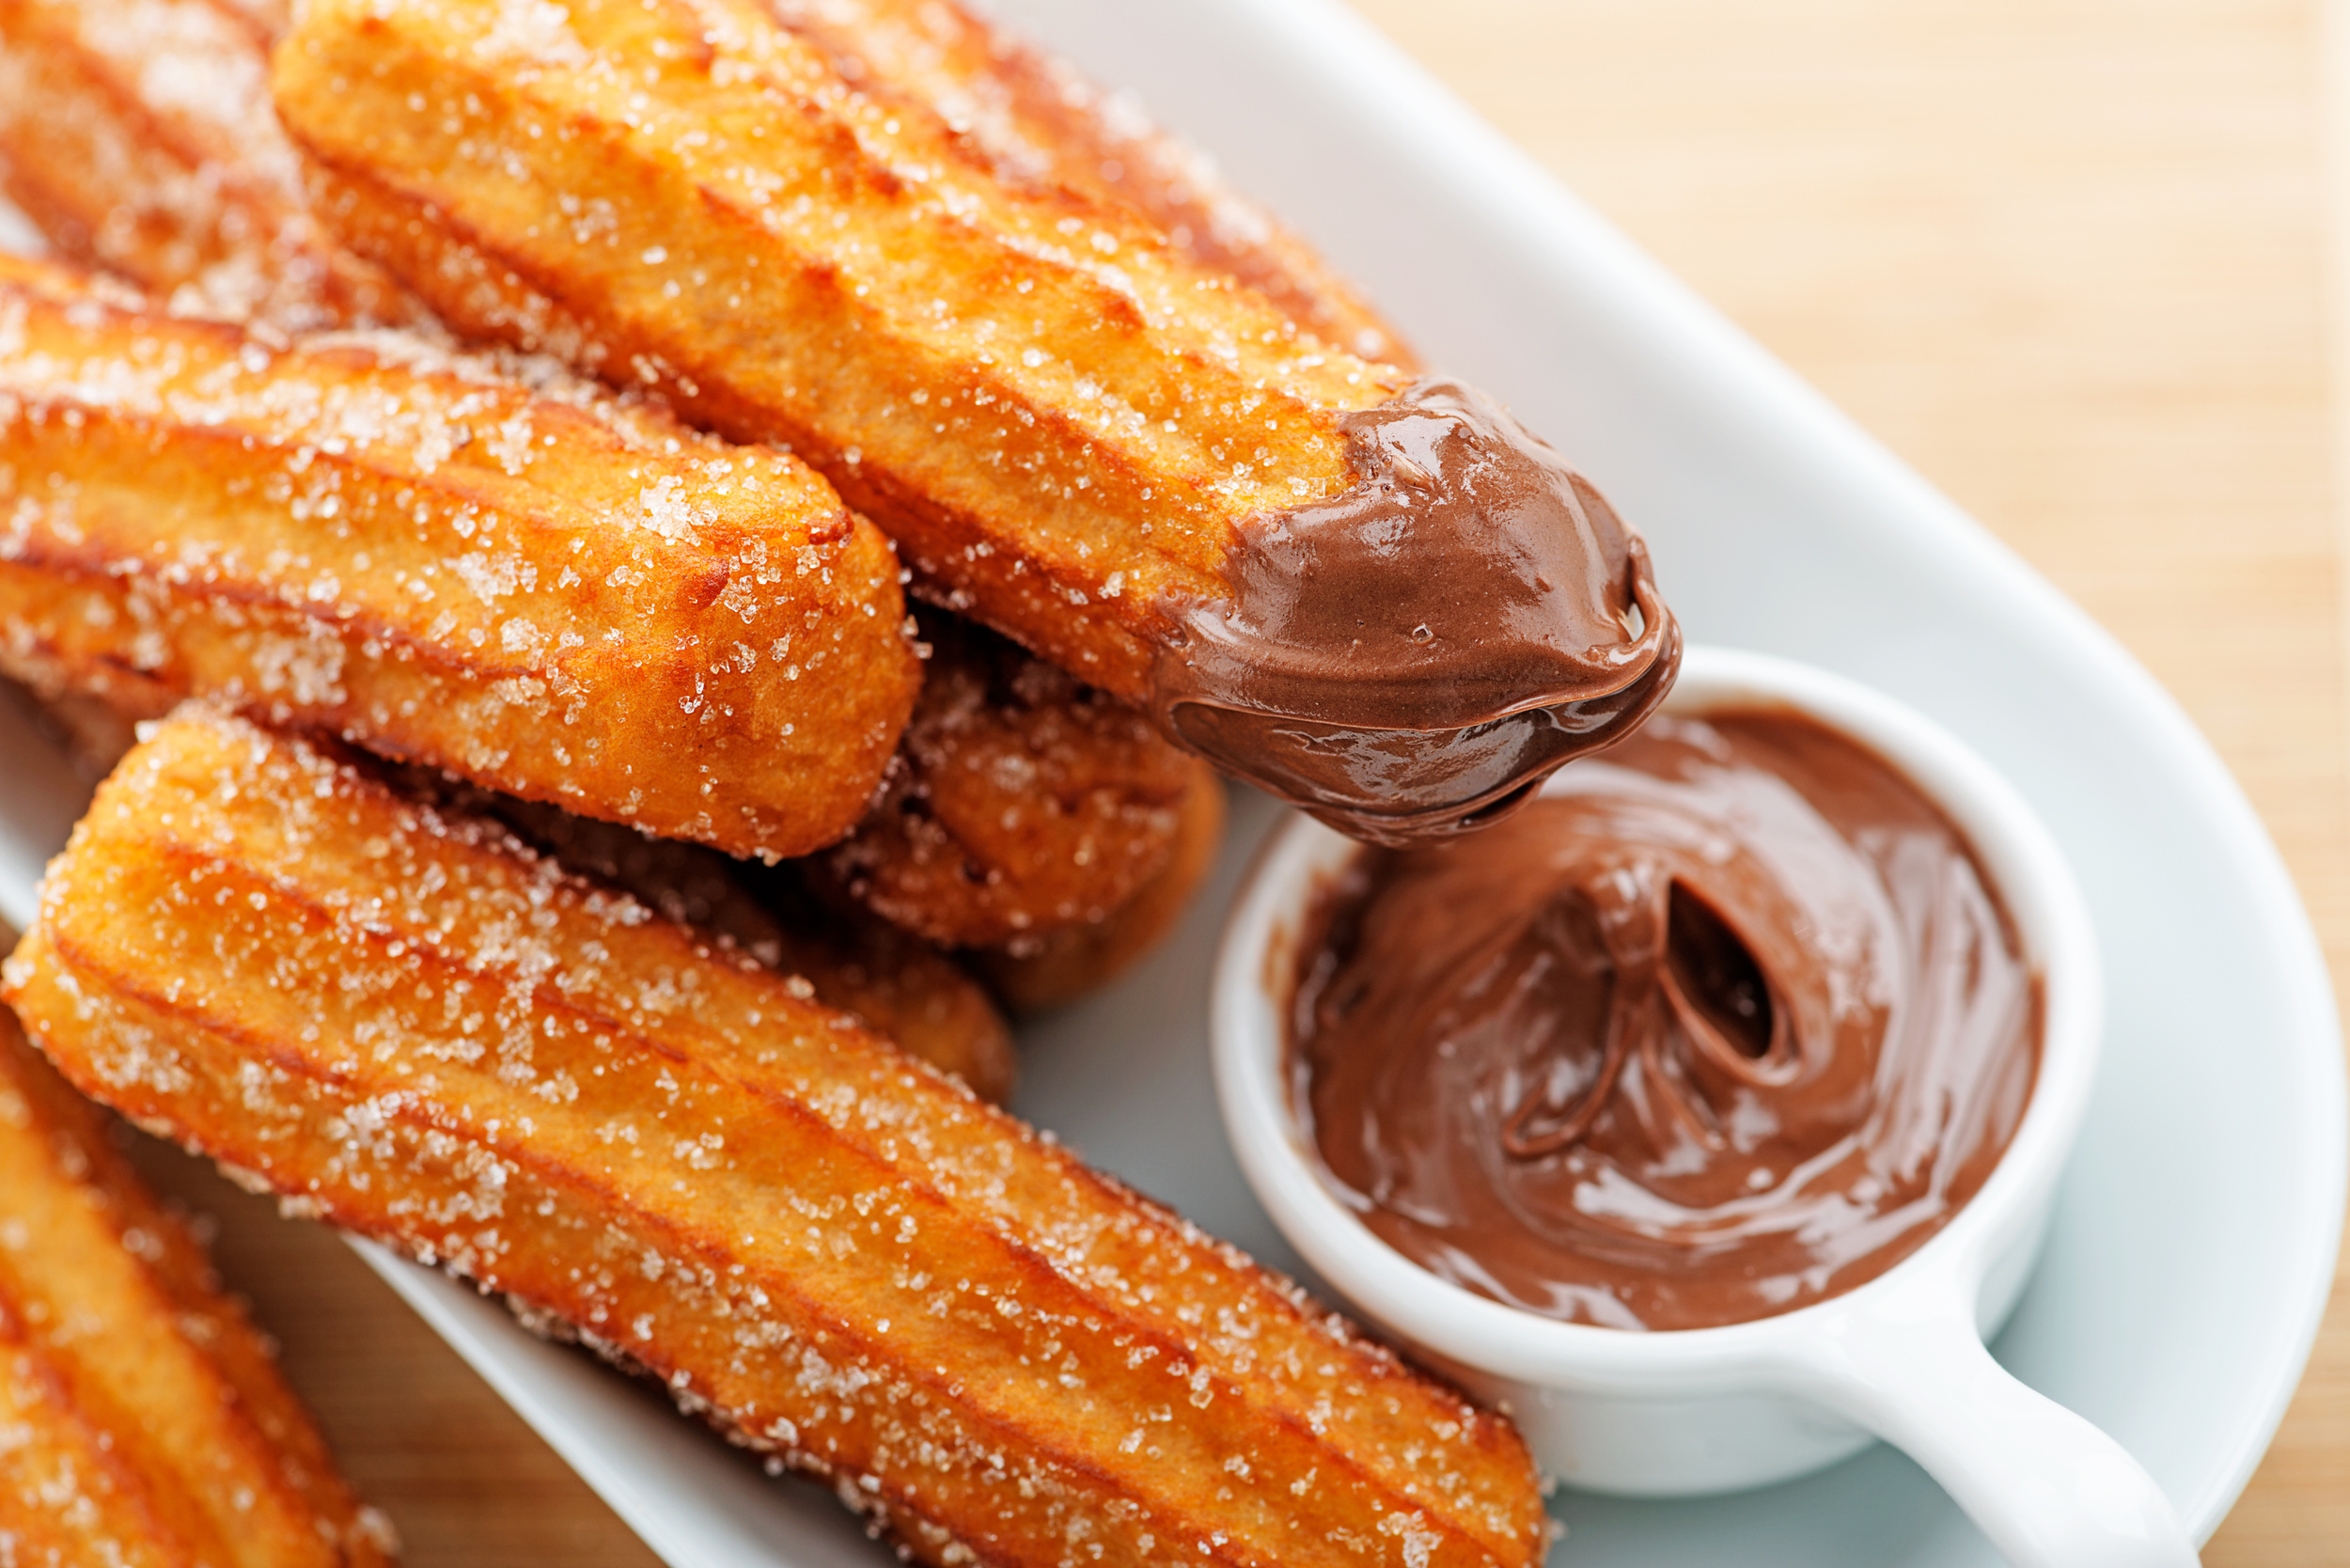 <p>This Spanish, Portuguese, and Mexican dessert is easier than it looks! (It’s also even tastier than it looks.) And the best part is that you probably already have all the ingredients in your kitchen, as <a href="https://www.cookingclassy.com/churros/"><span>this recipe from Cooking Classy</span></a> only calls for butter, sugar, flour, cinnamon, salt, egg, vanilla, and some oil. </p><p>You may also like: <a href='https://www.yardbarker.com/lifestyle/articles/20_fascinating_facts_about_mcdonalds/s1__37905110'>20 fascinating facts about McDonald’s</a></p>